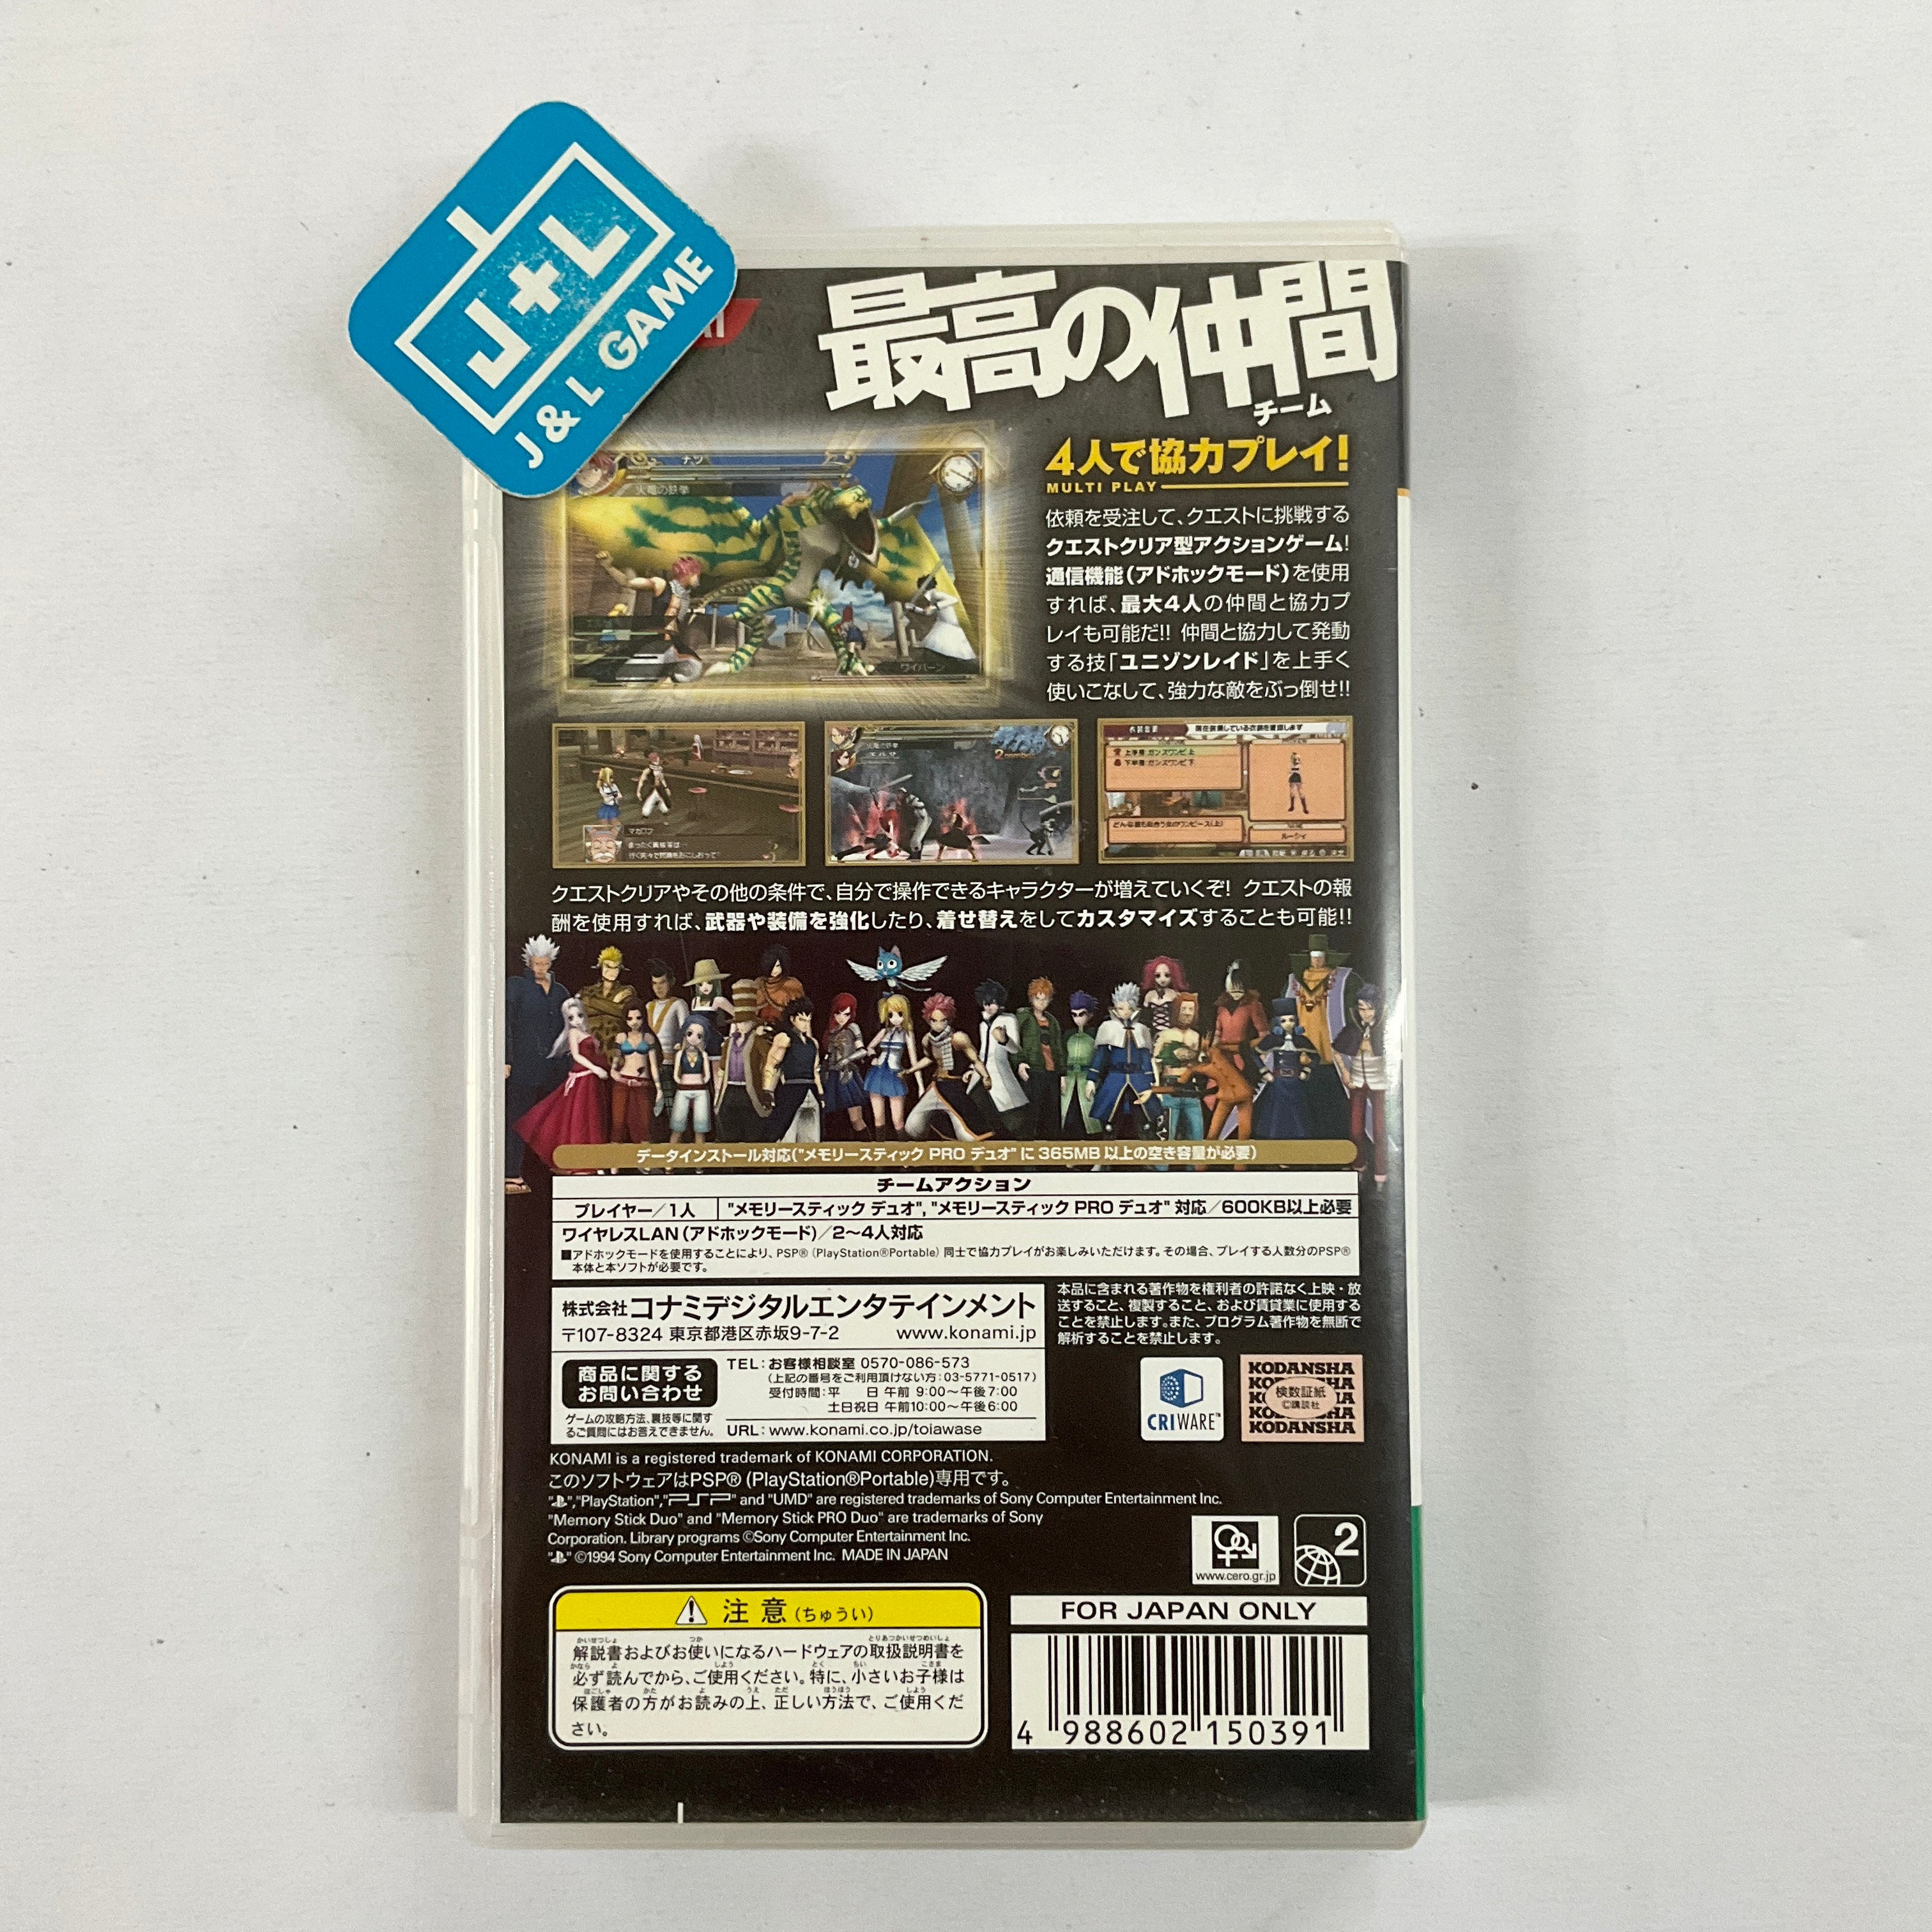 Fairy Tail: Portable Guild - Sony PSP [Pre-Owned] (Japanese Import) Video Games Konami   